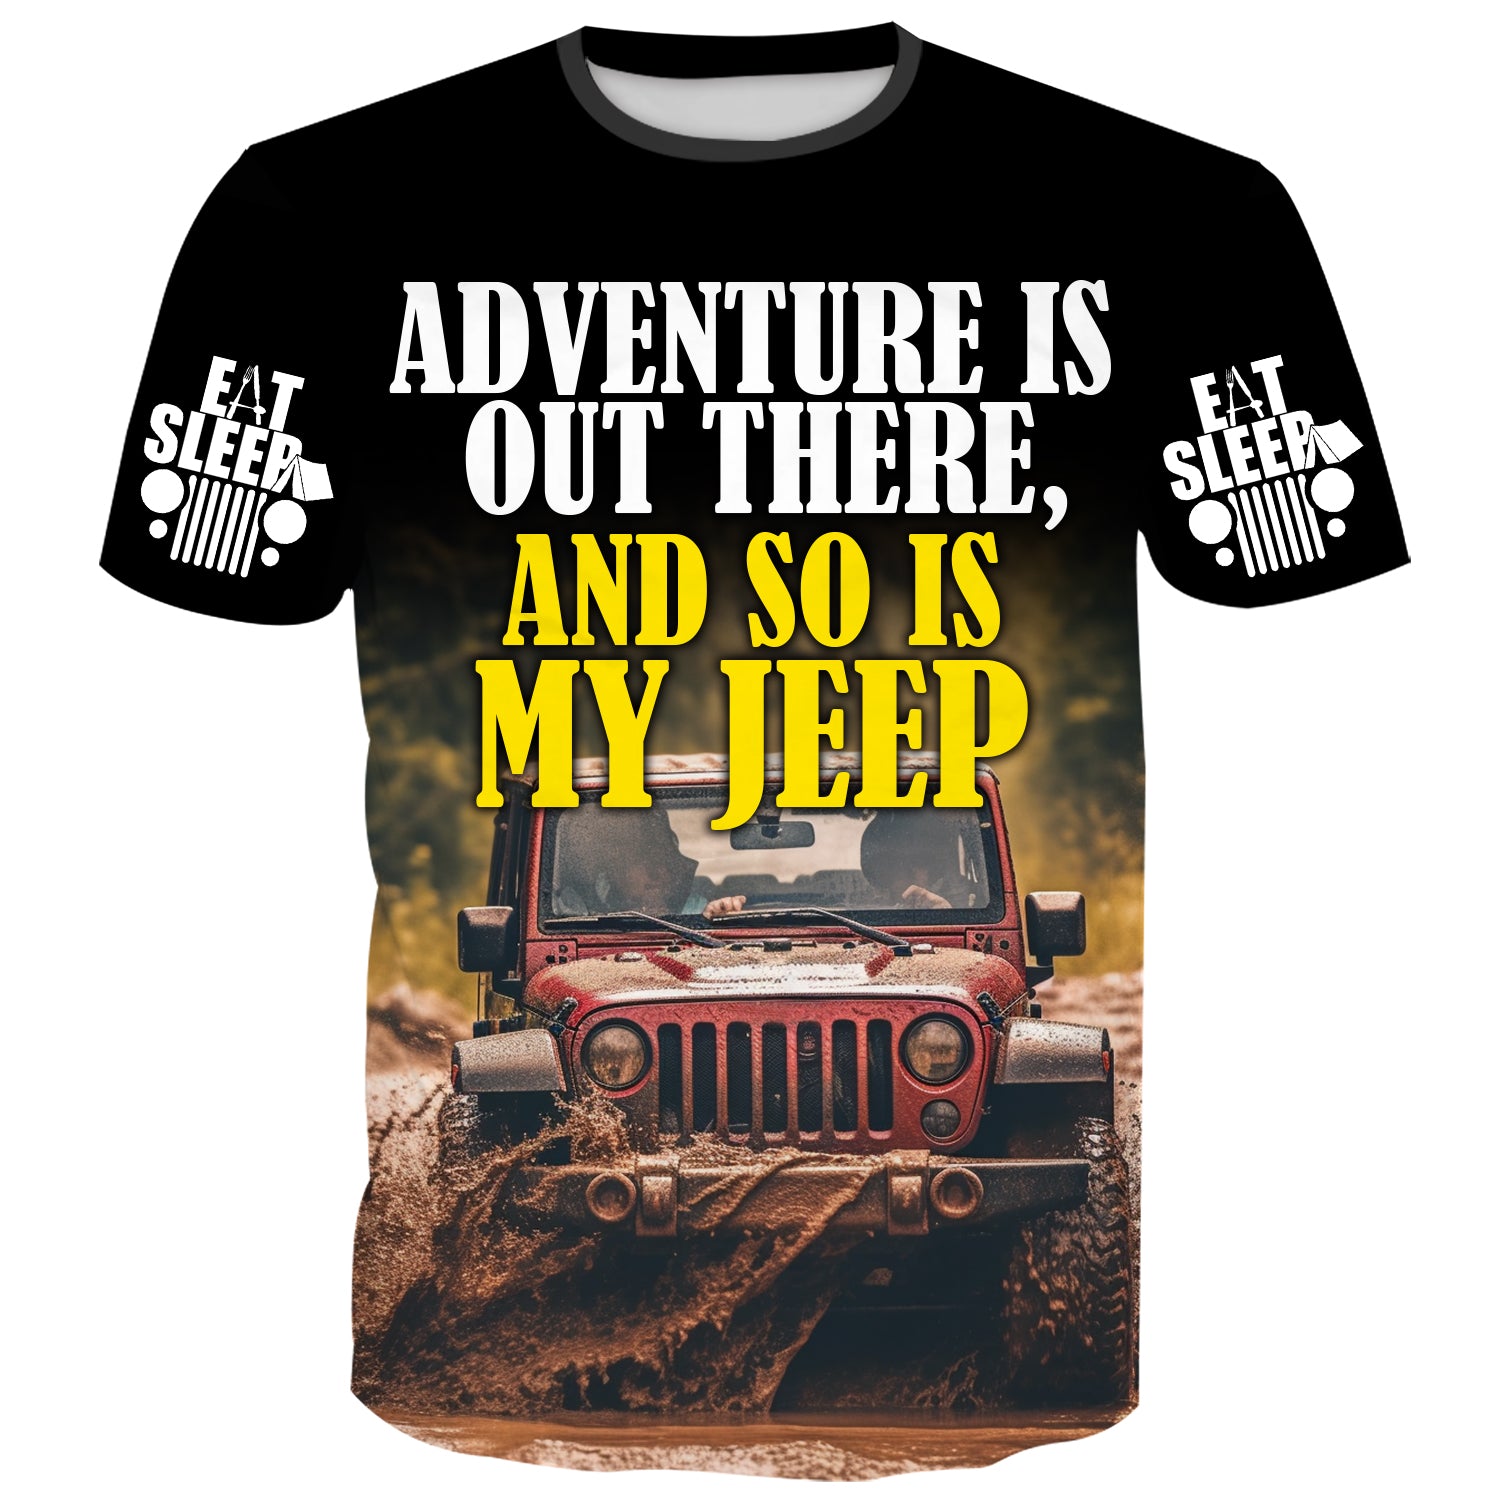 Adventure is out there, and so is my Jeep - T-Shirt